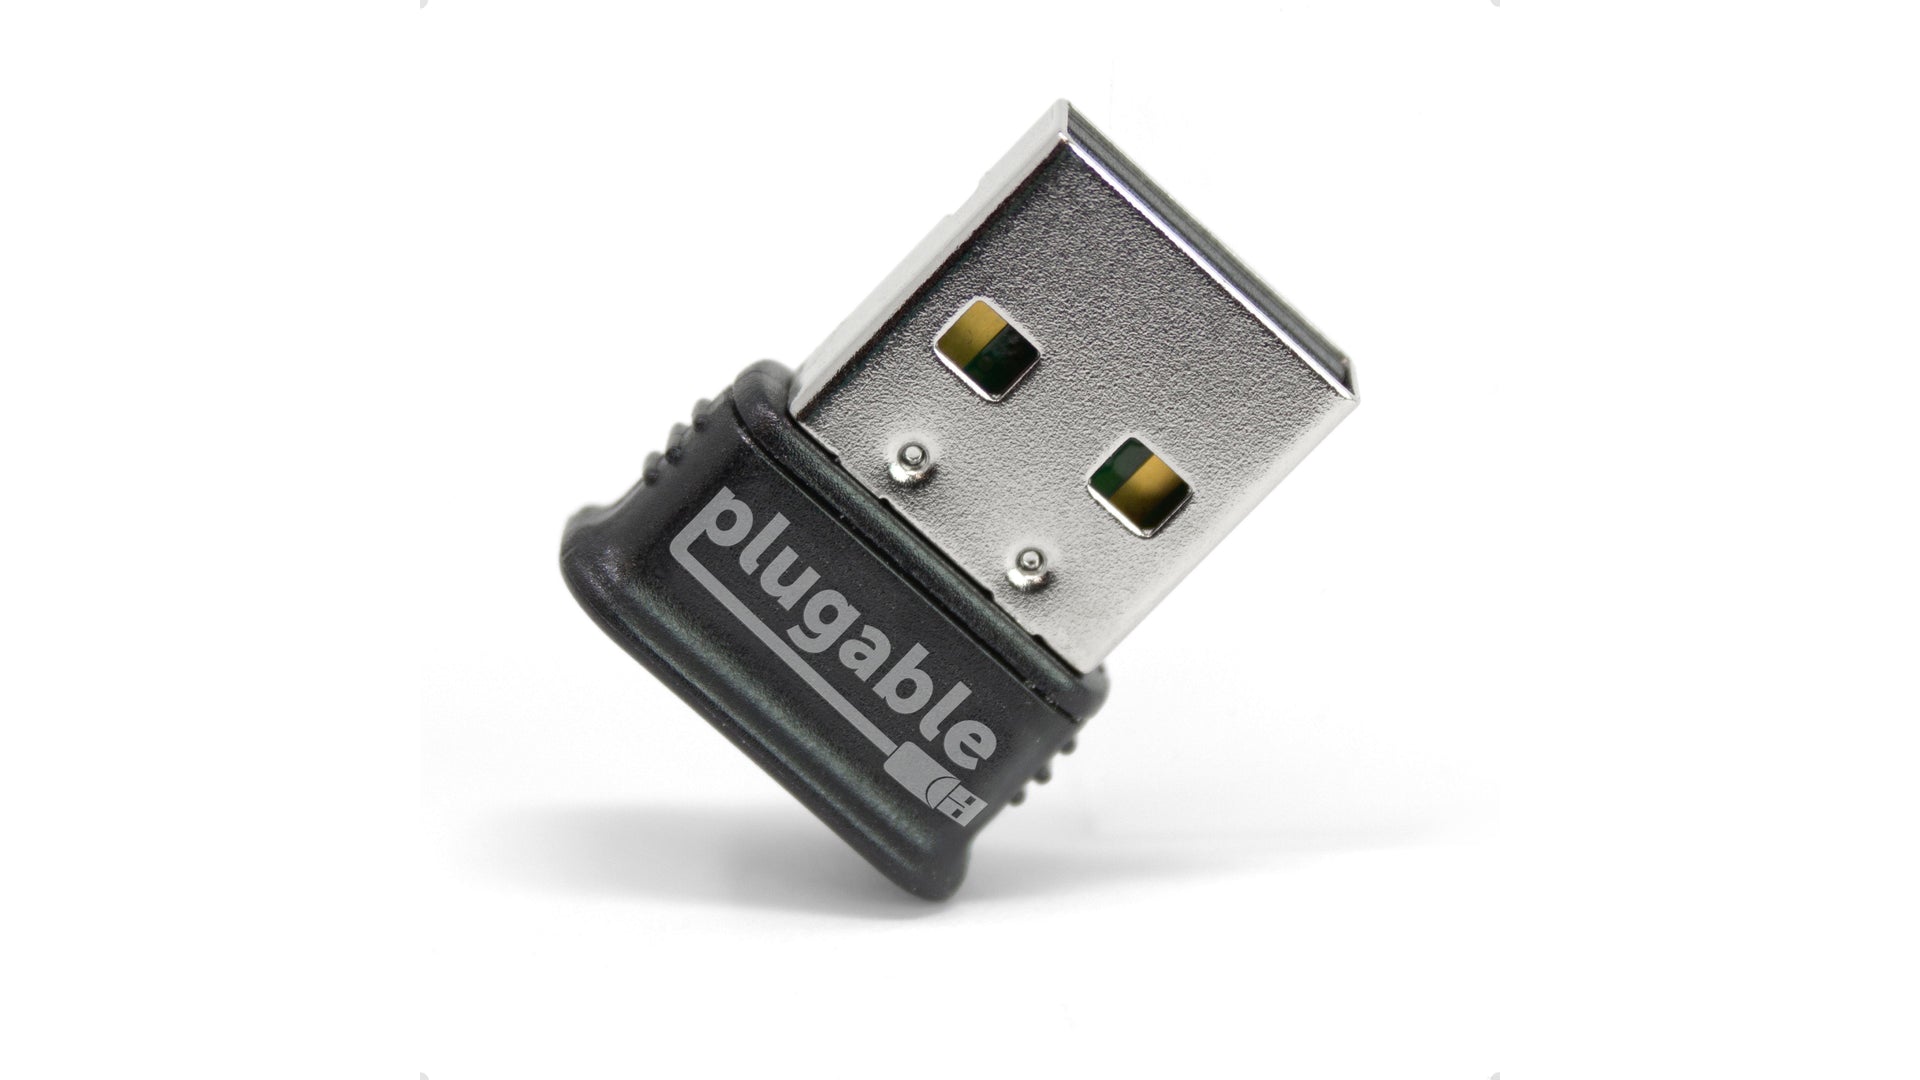 What Is a Bluetooth Dongle & How Do I Use It?